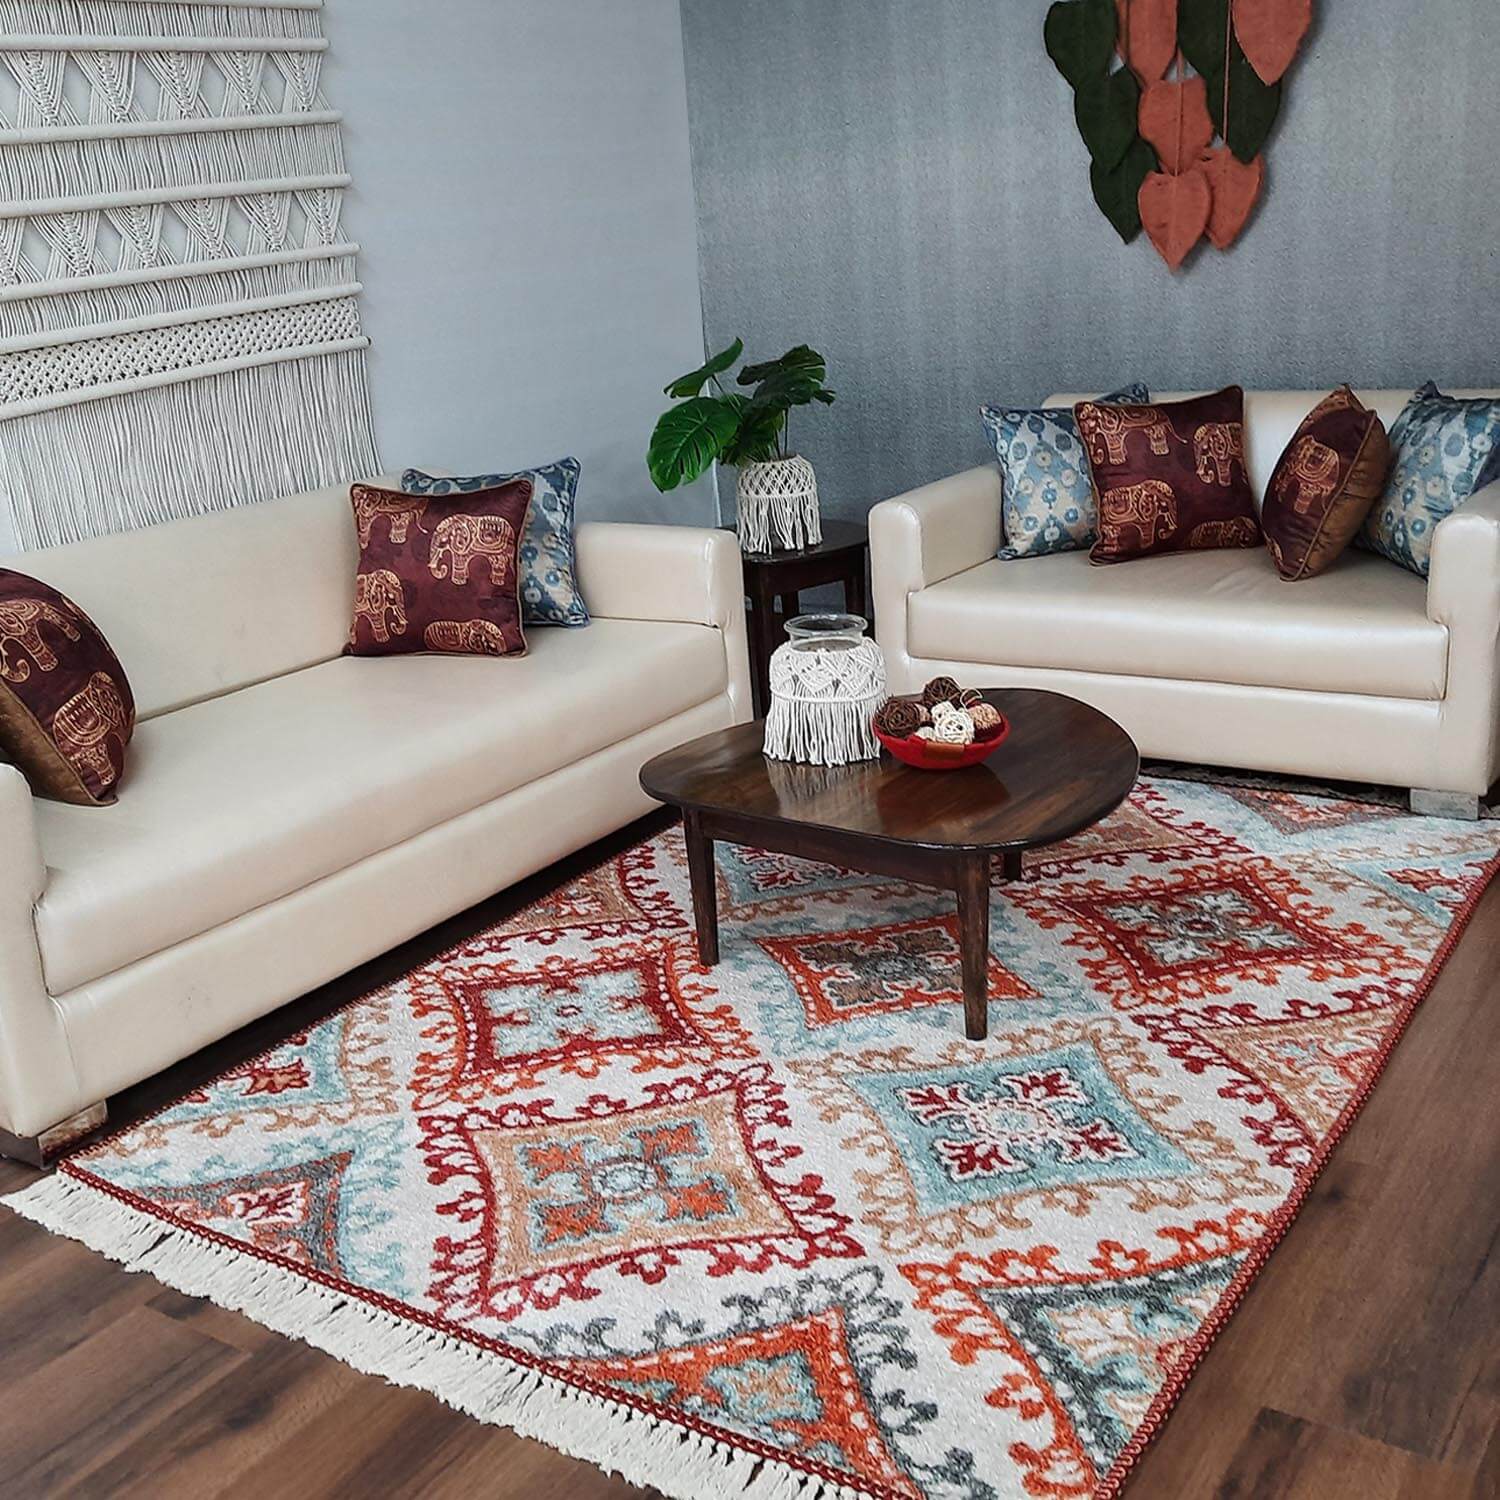 The ethnic touch of the kilim (1)